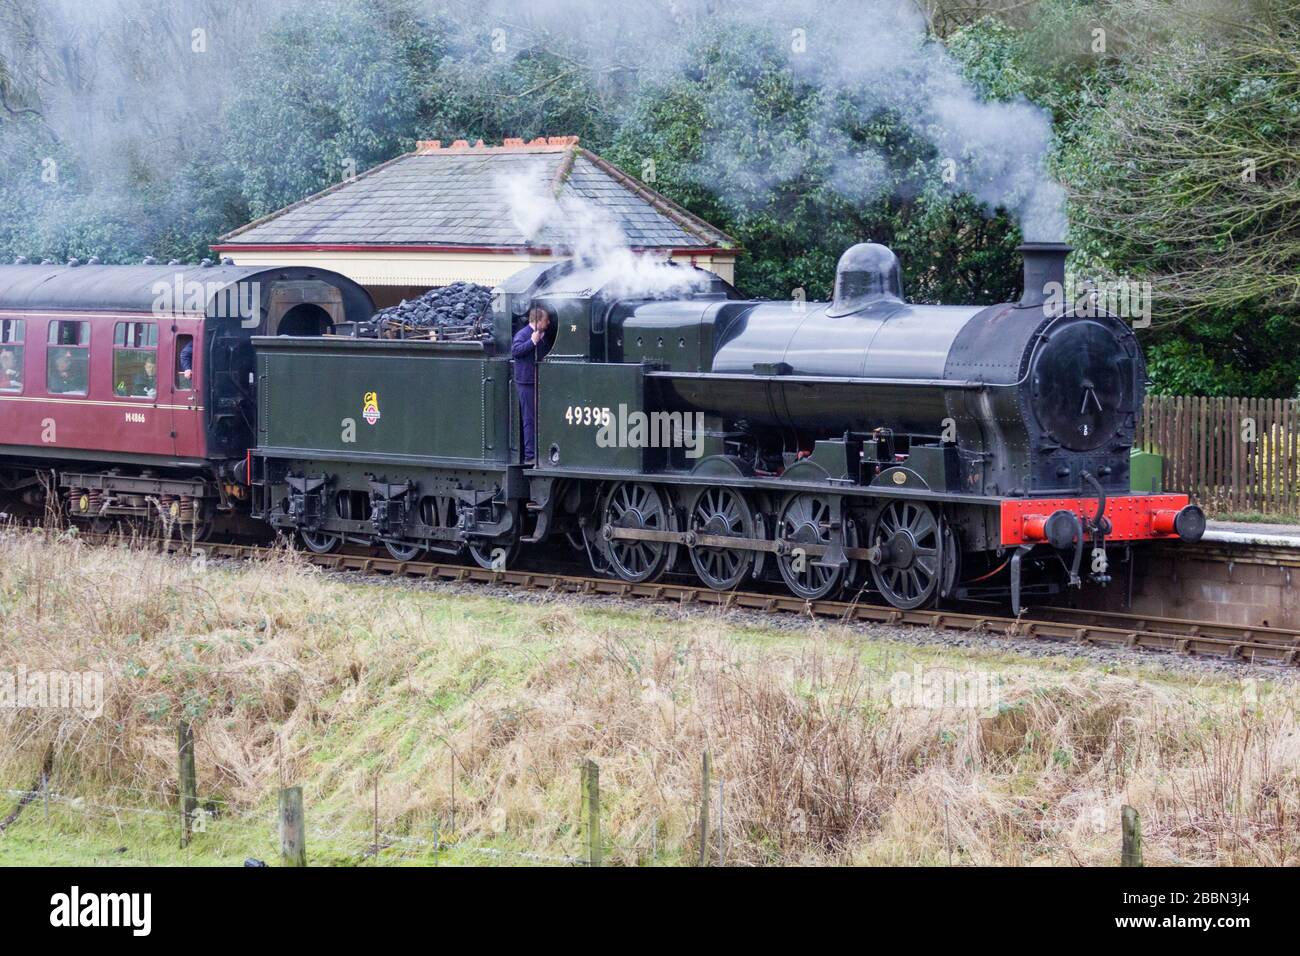 49395 a steam train on the East Lancs Railway Stock Photo